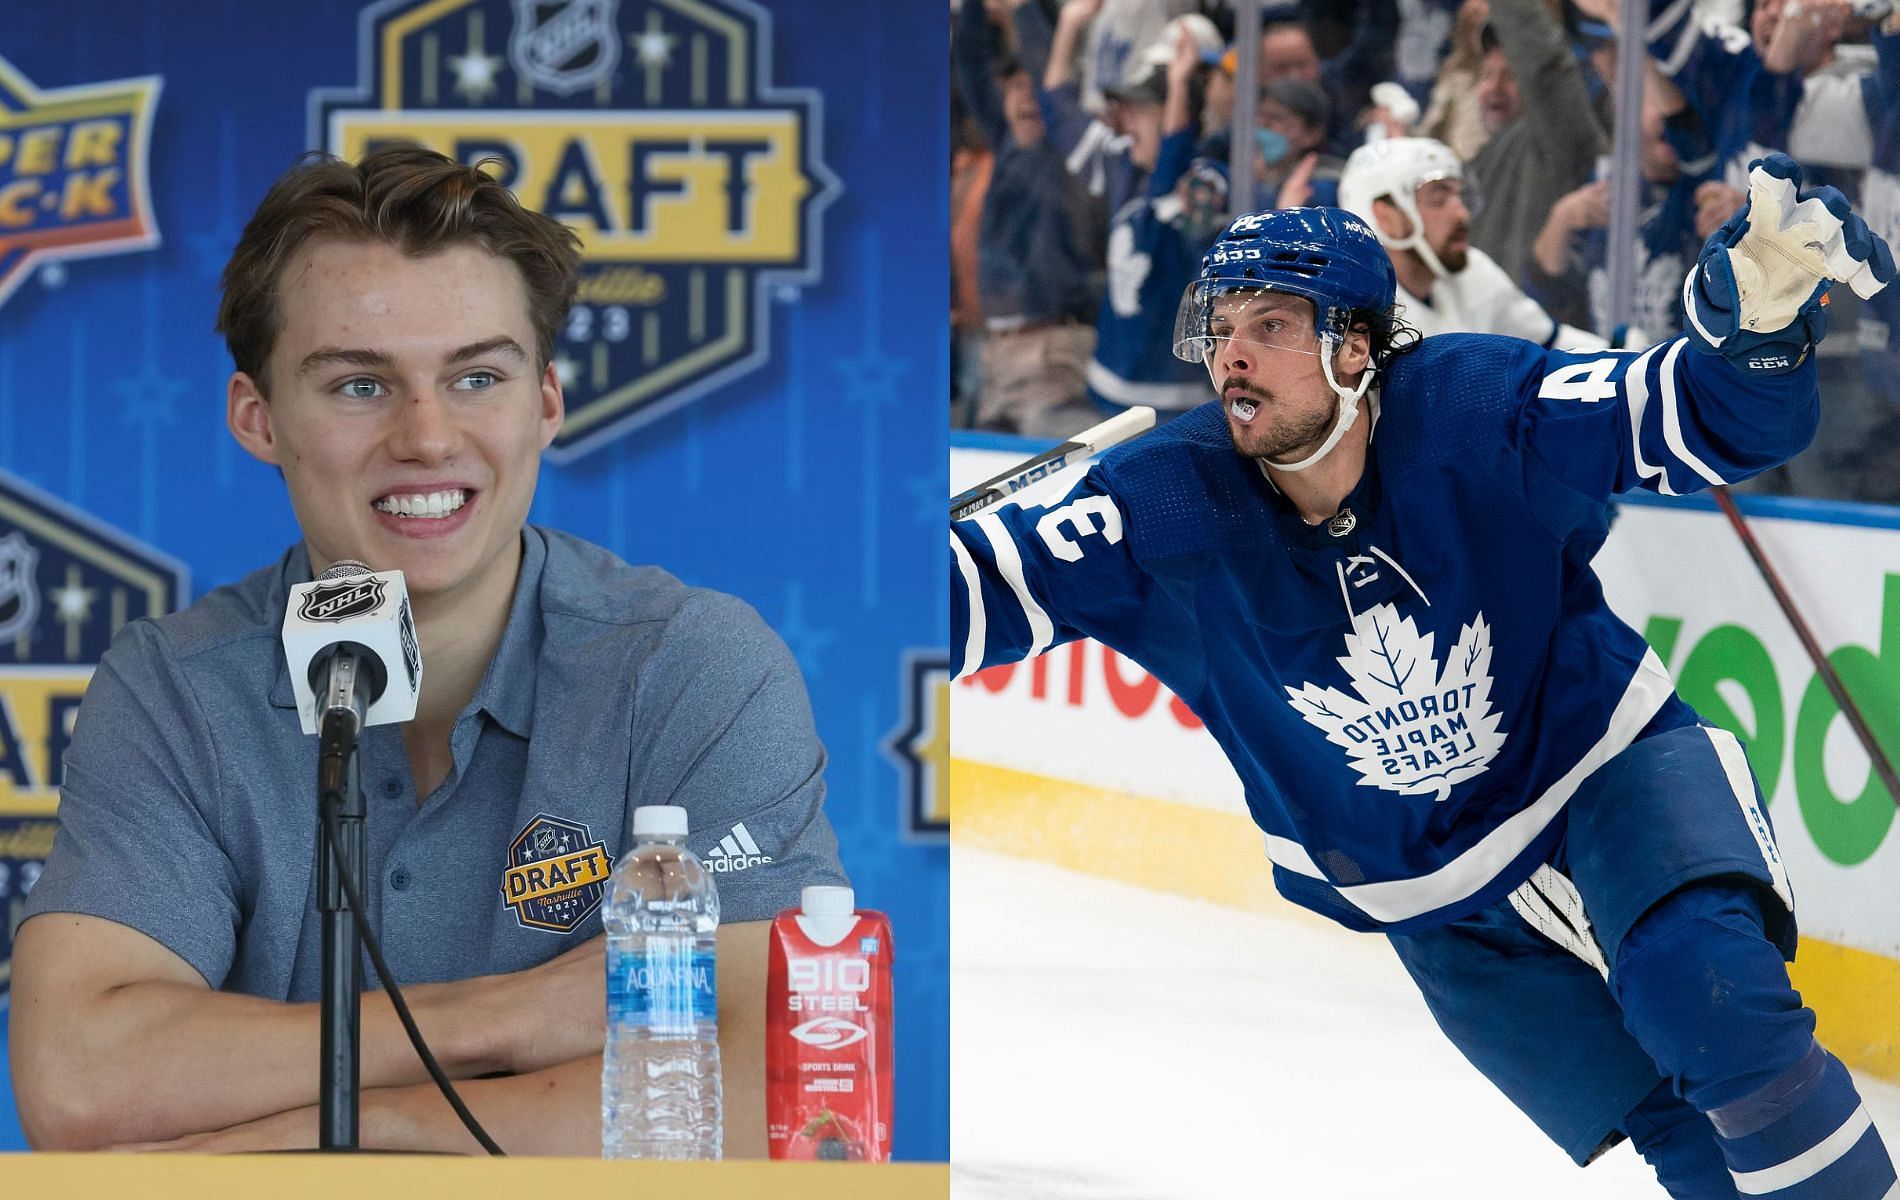 Early signs indicate Auston Matthews could be in for monster